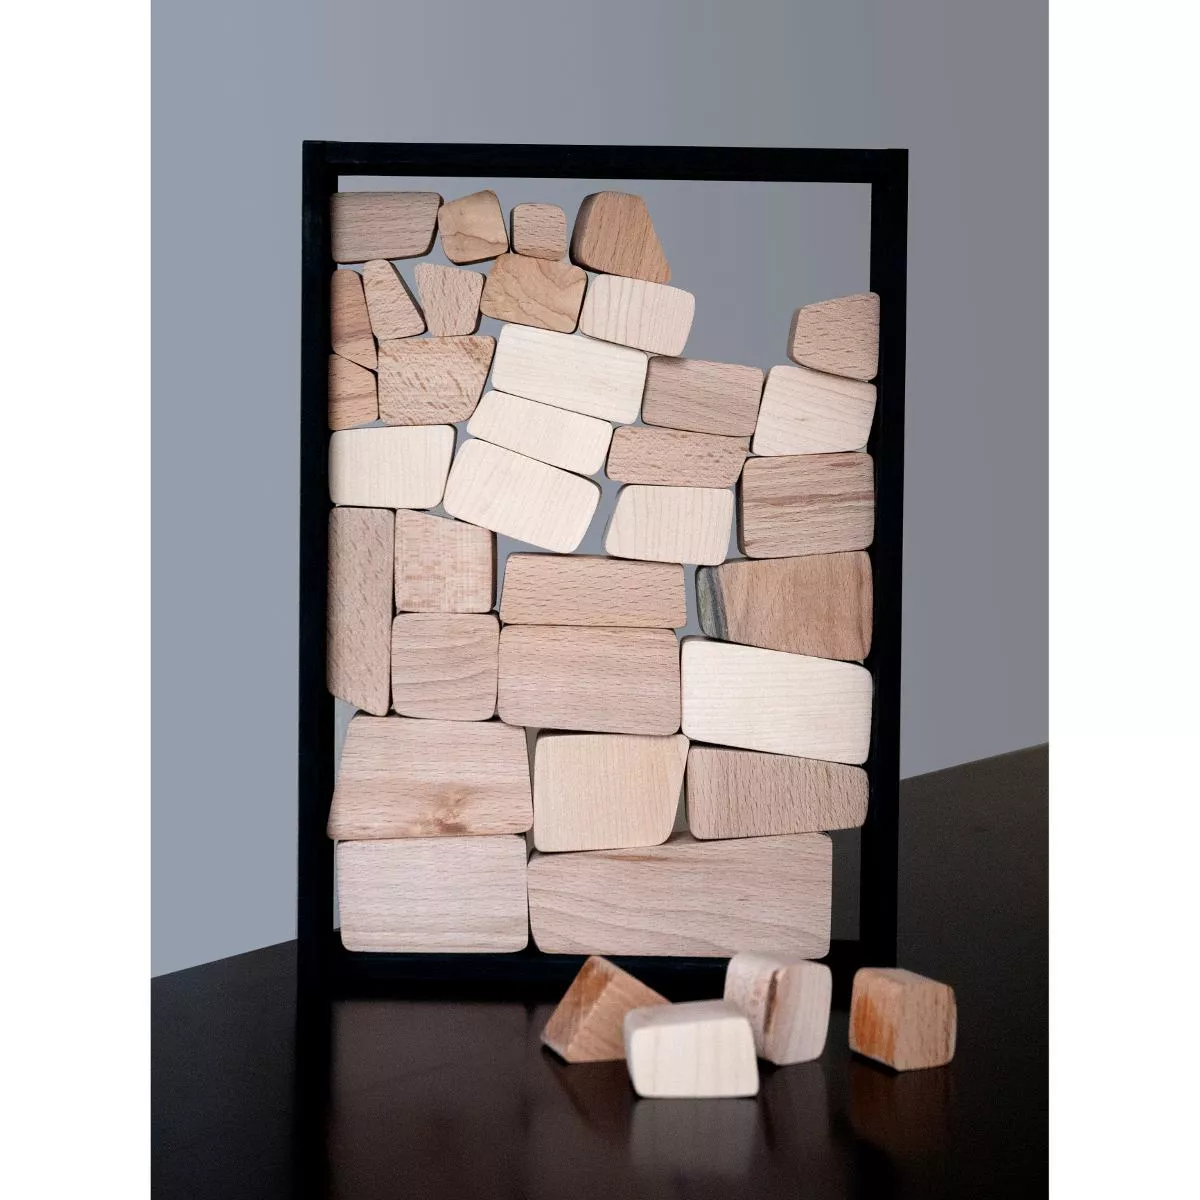 Stone Wall Puzzle Toy made of Wood